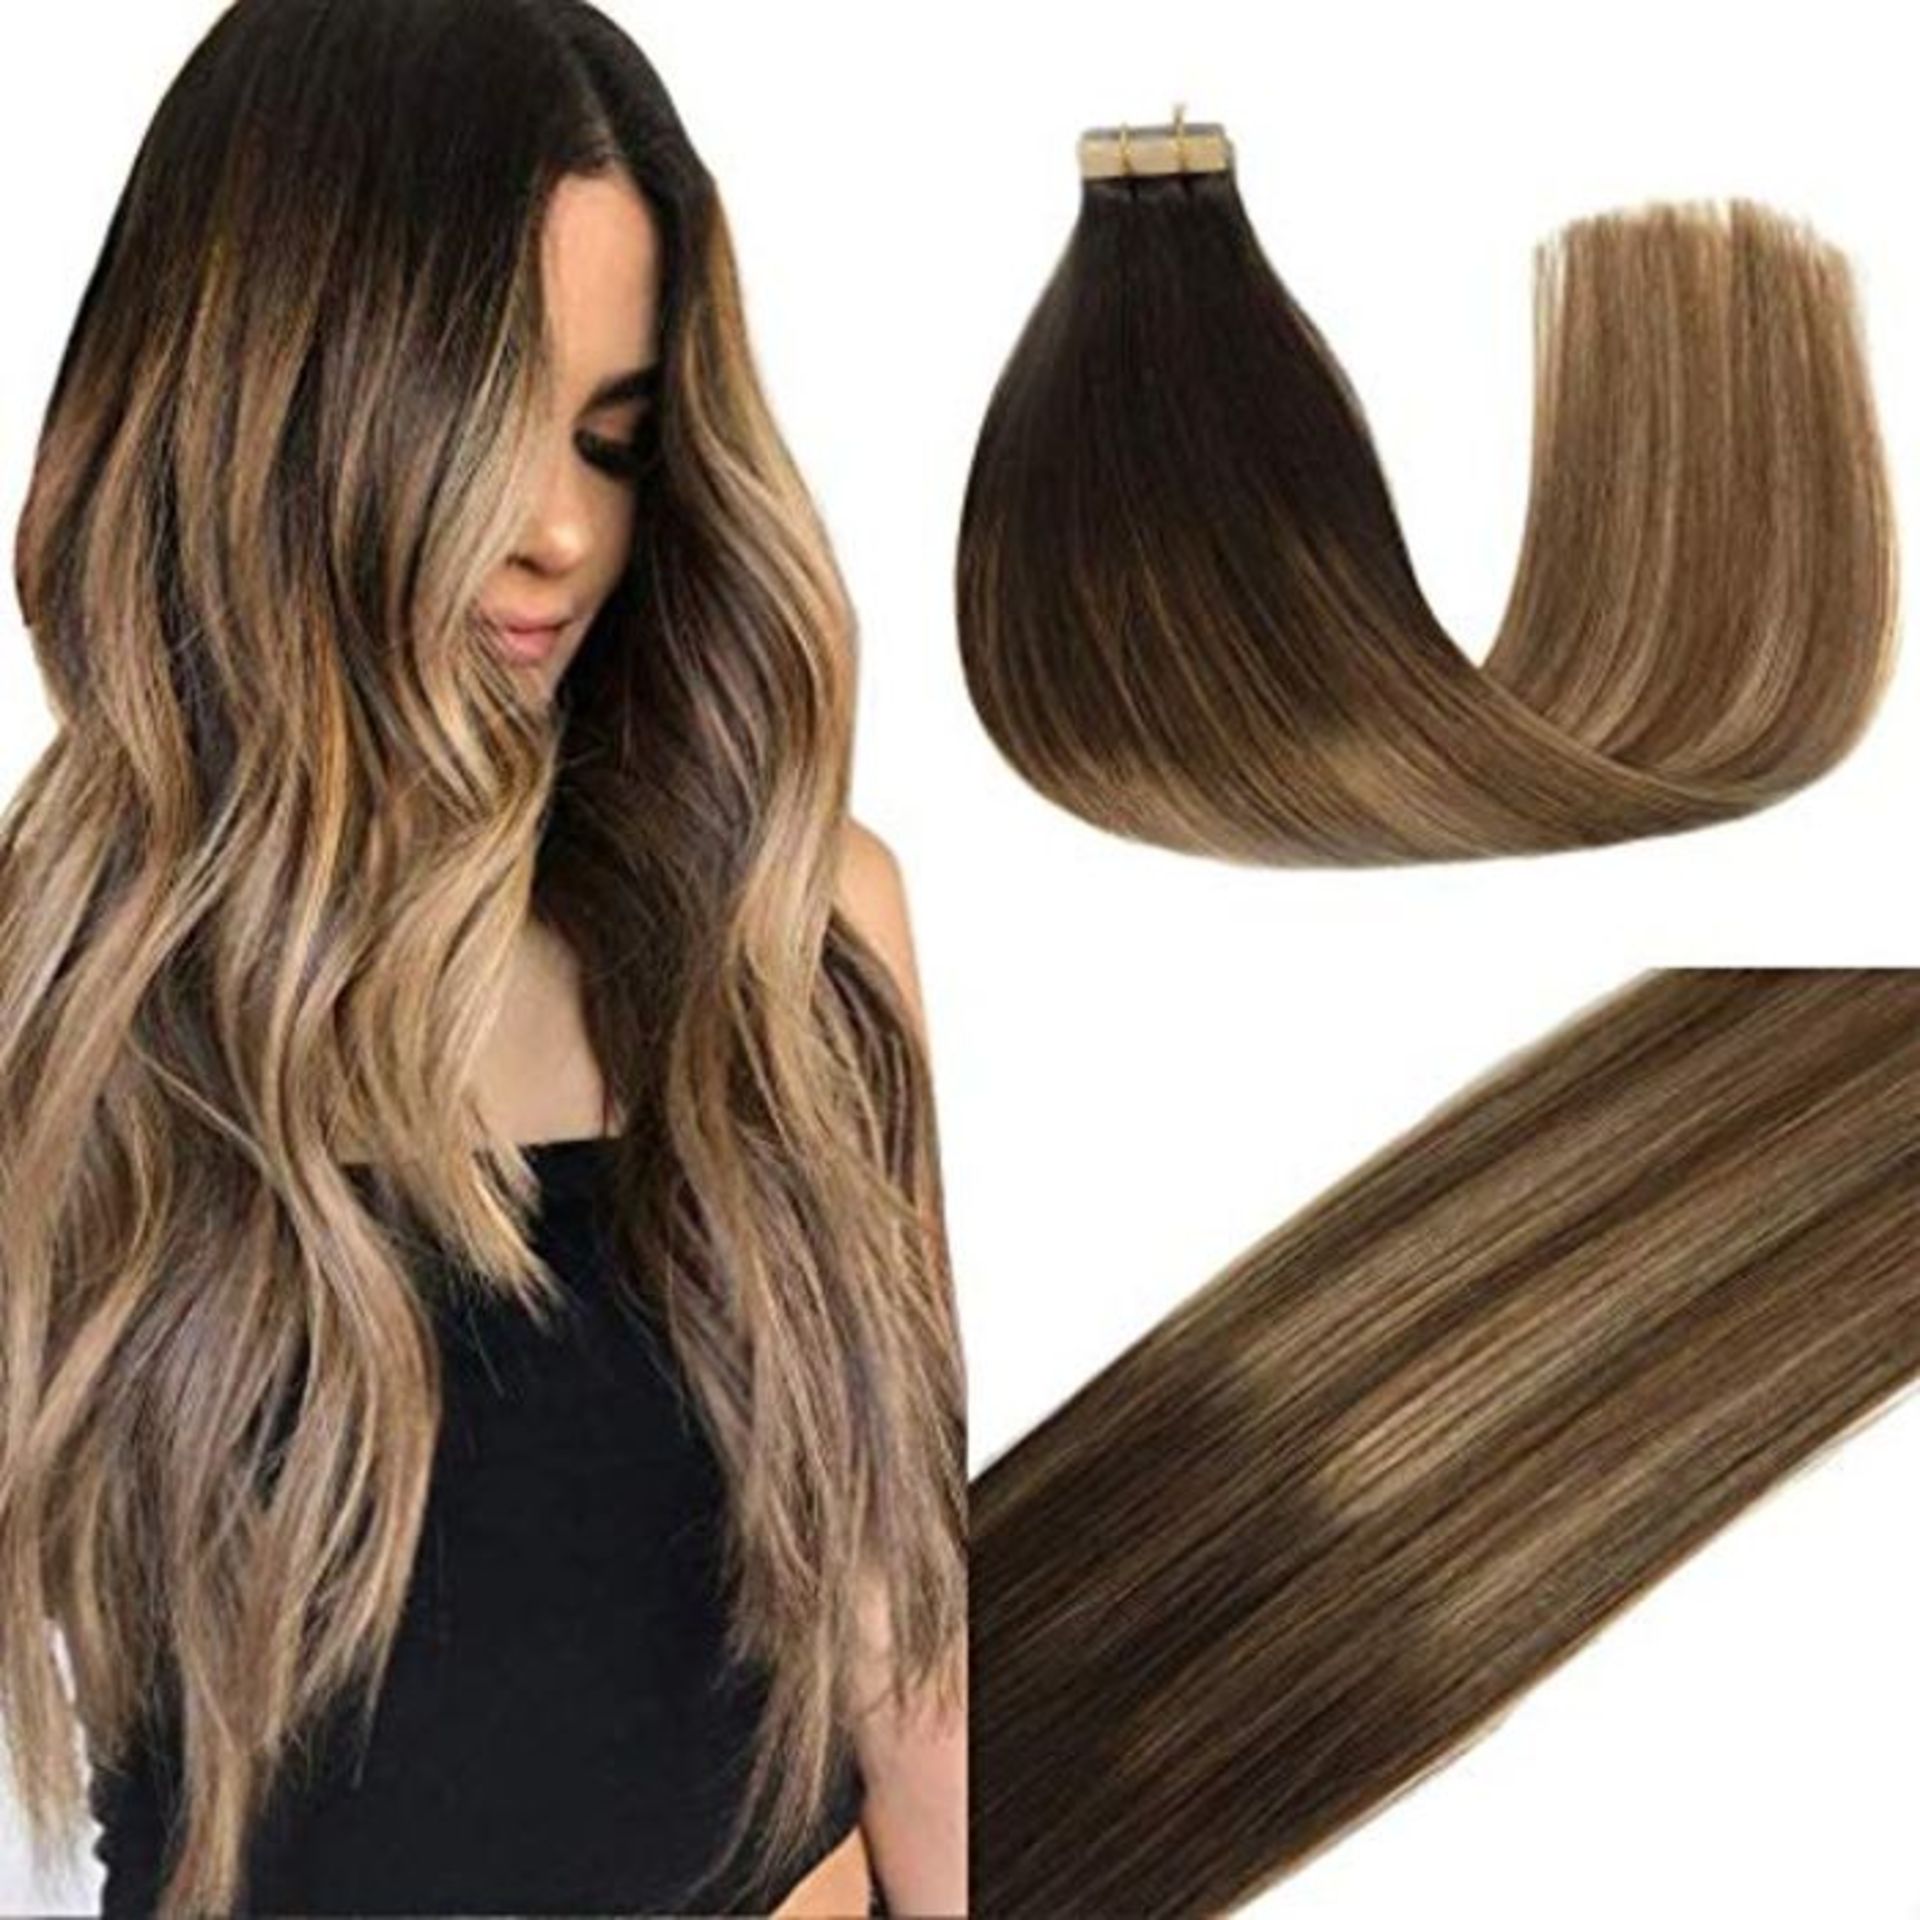 Googoo 14inch Human Hair Extensions Tape in Ombre Dark Brown to Light Brown and Ash Bl